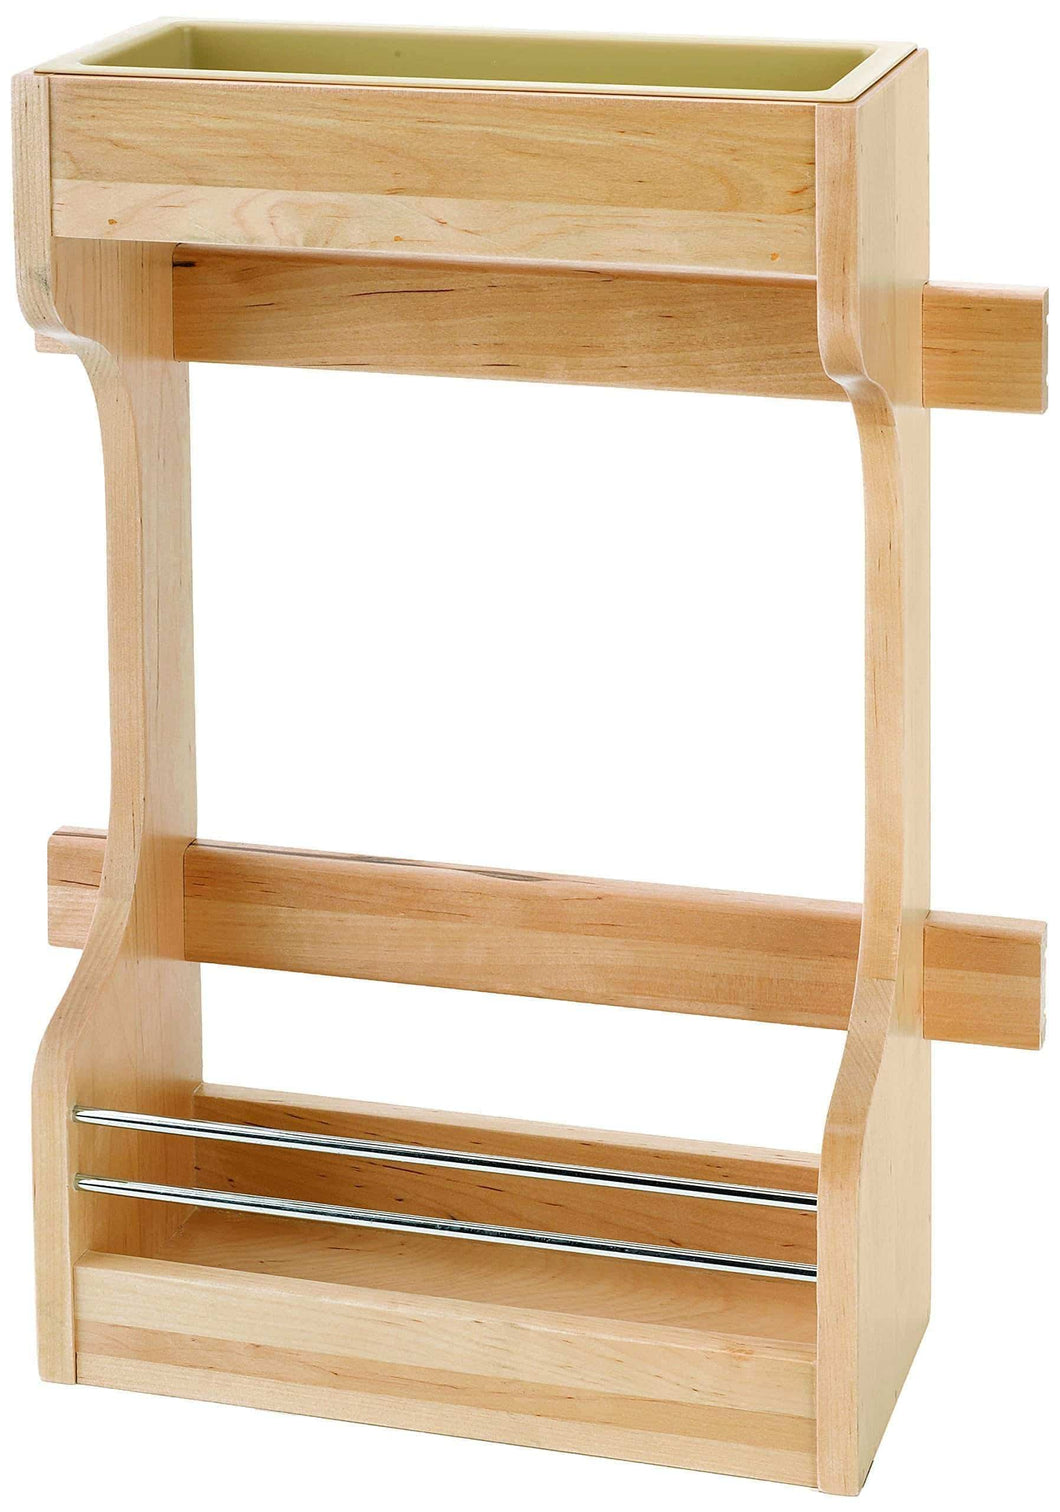 Top rated rev a shelf small sink base organizer door storage natural